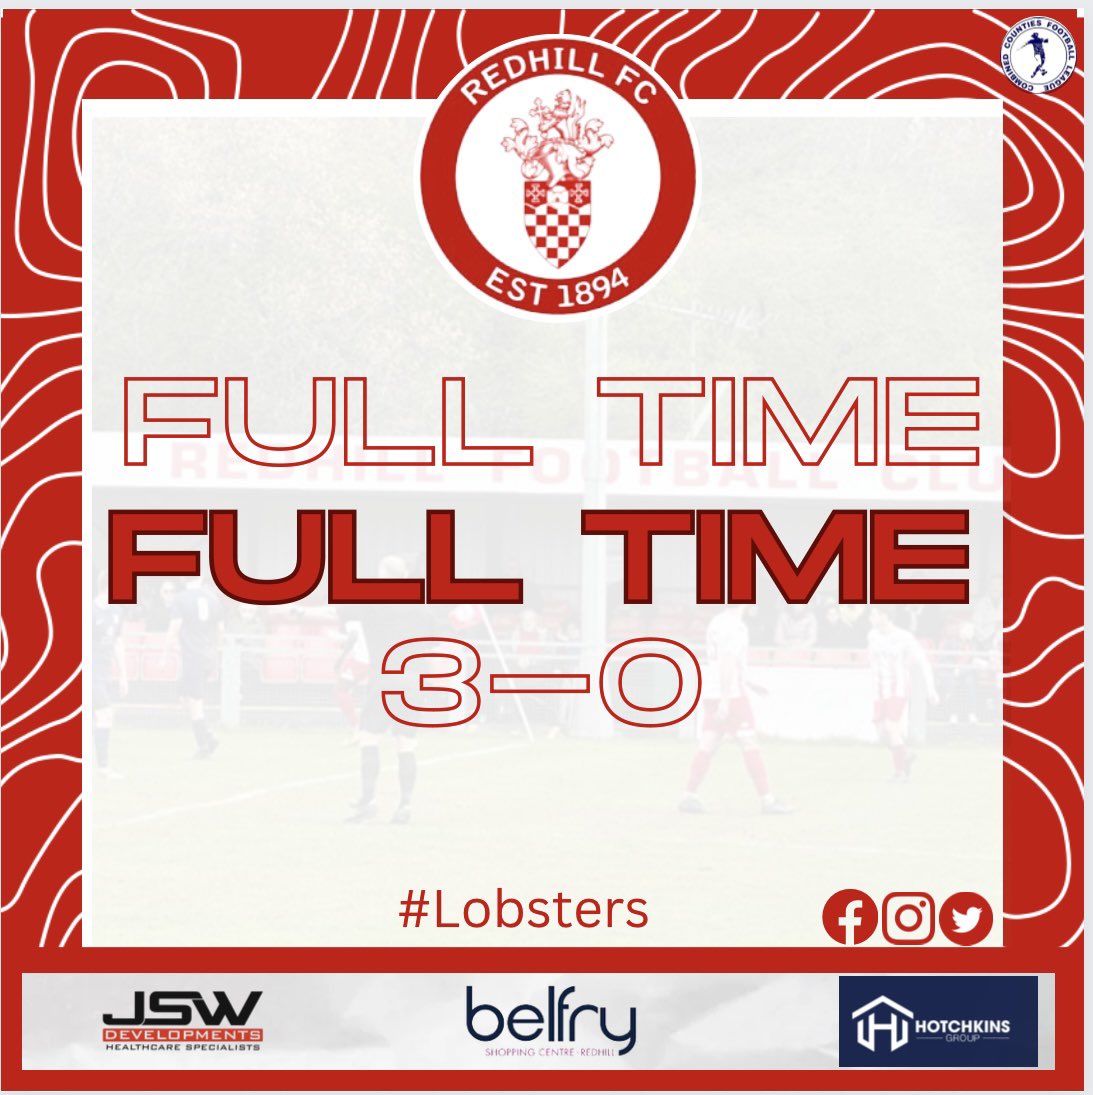 🦞Full Time🦞 3 massive points for the lobsters with a 3-0 win against @alton_fc in @ComCoFL . Two goal in the 1st half by @AlexKeating1995 and Nathan Hogan. Keats then added a 3rd early in 2nd half. Redhill 3-0 Alton